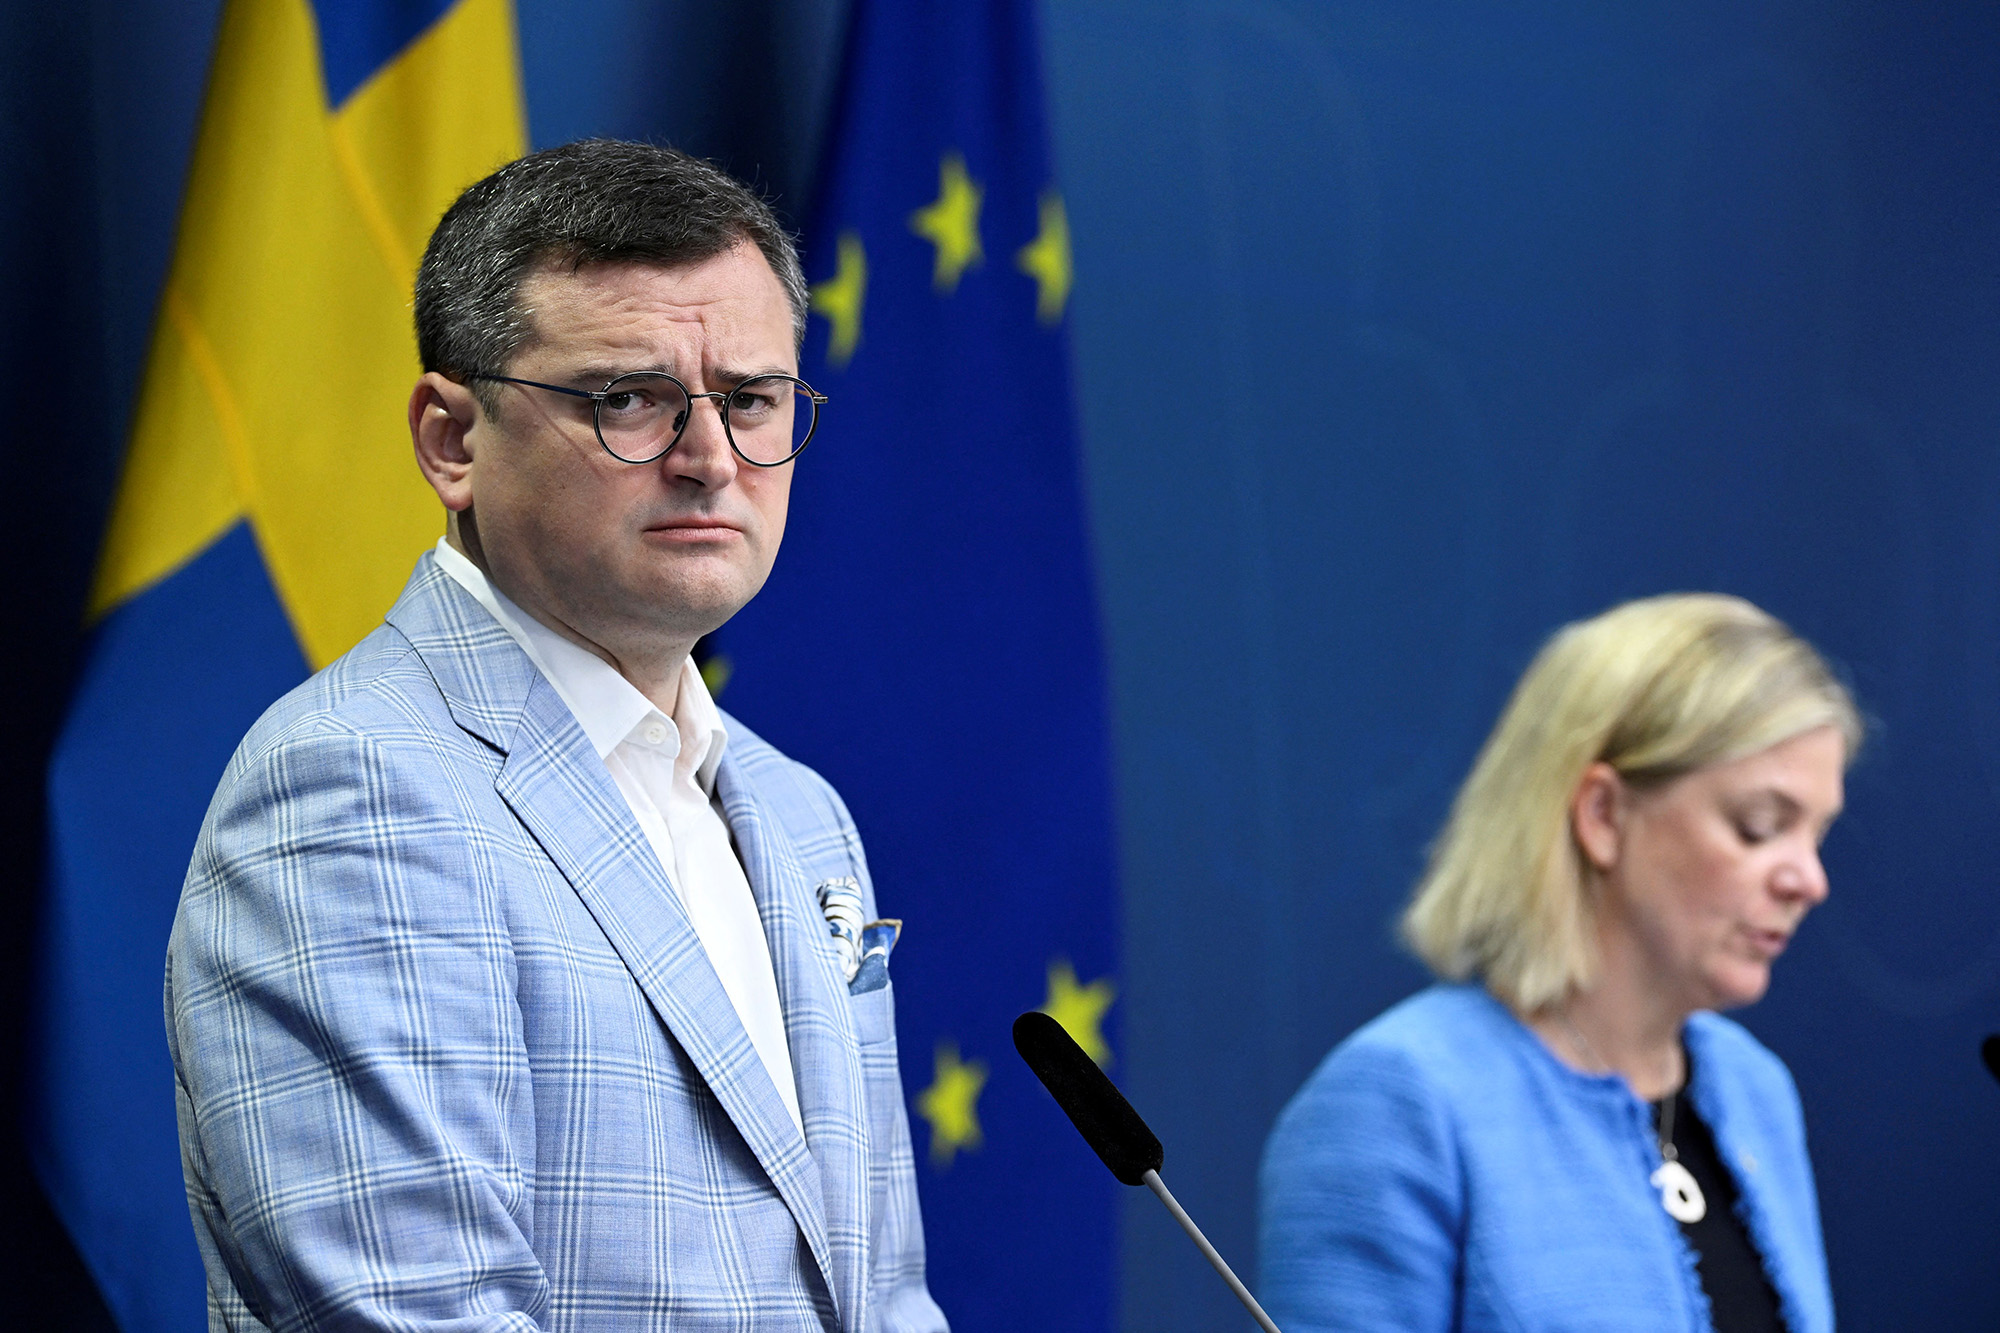 Ukrainian Foreign Minister Dmytro Kuleba, left, and Swedish Prime Minister Magdalena Andersson, right, attend a press conference in Stockholm, Sweden, on August 29.